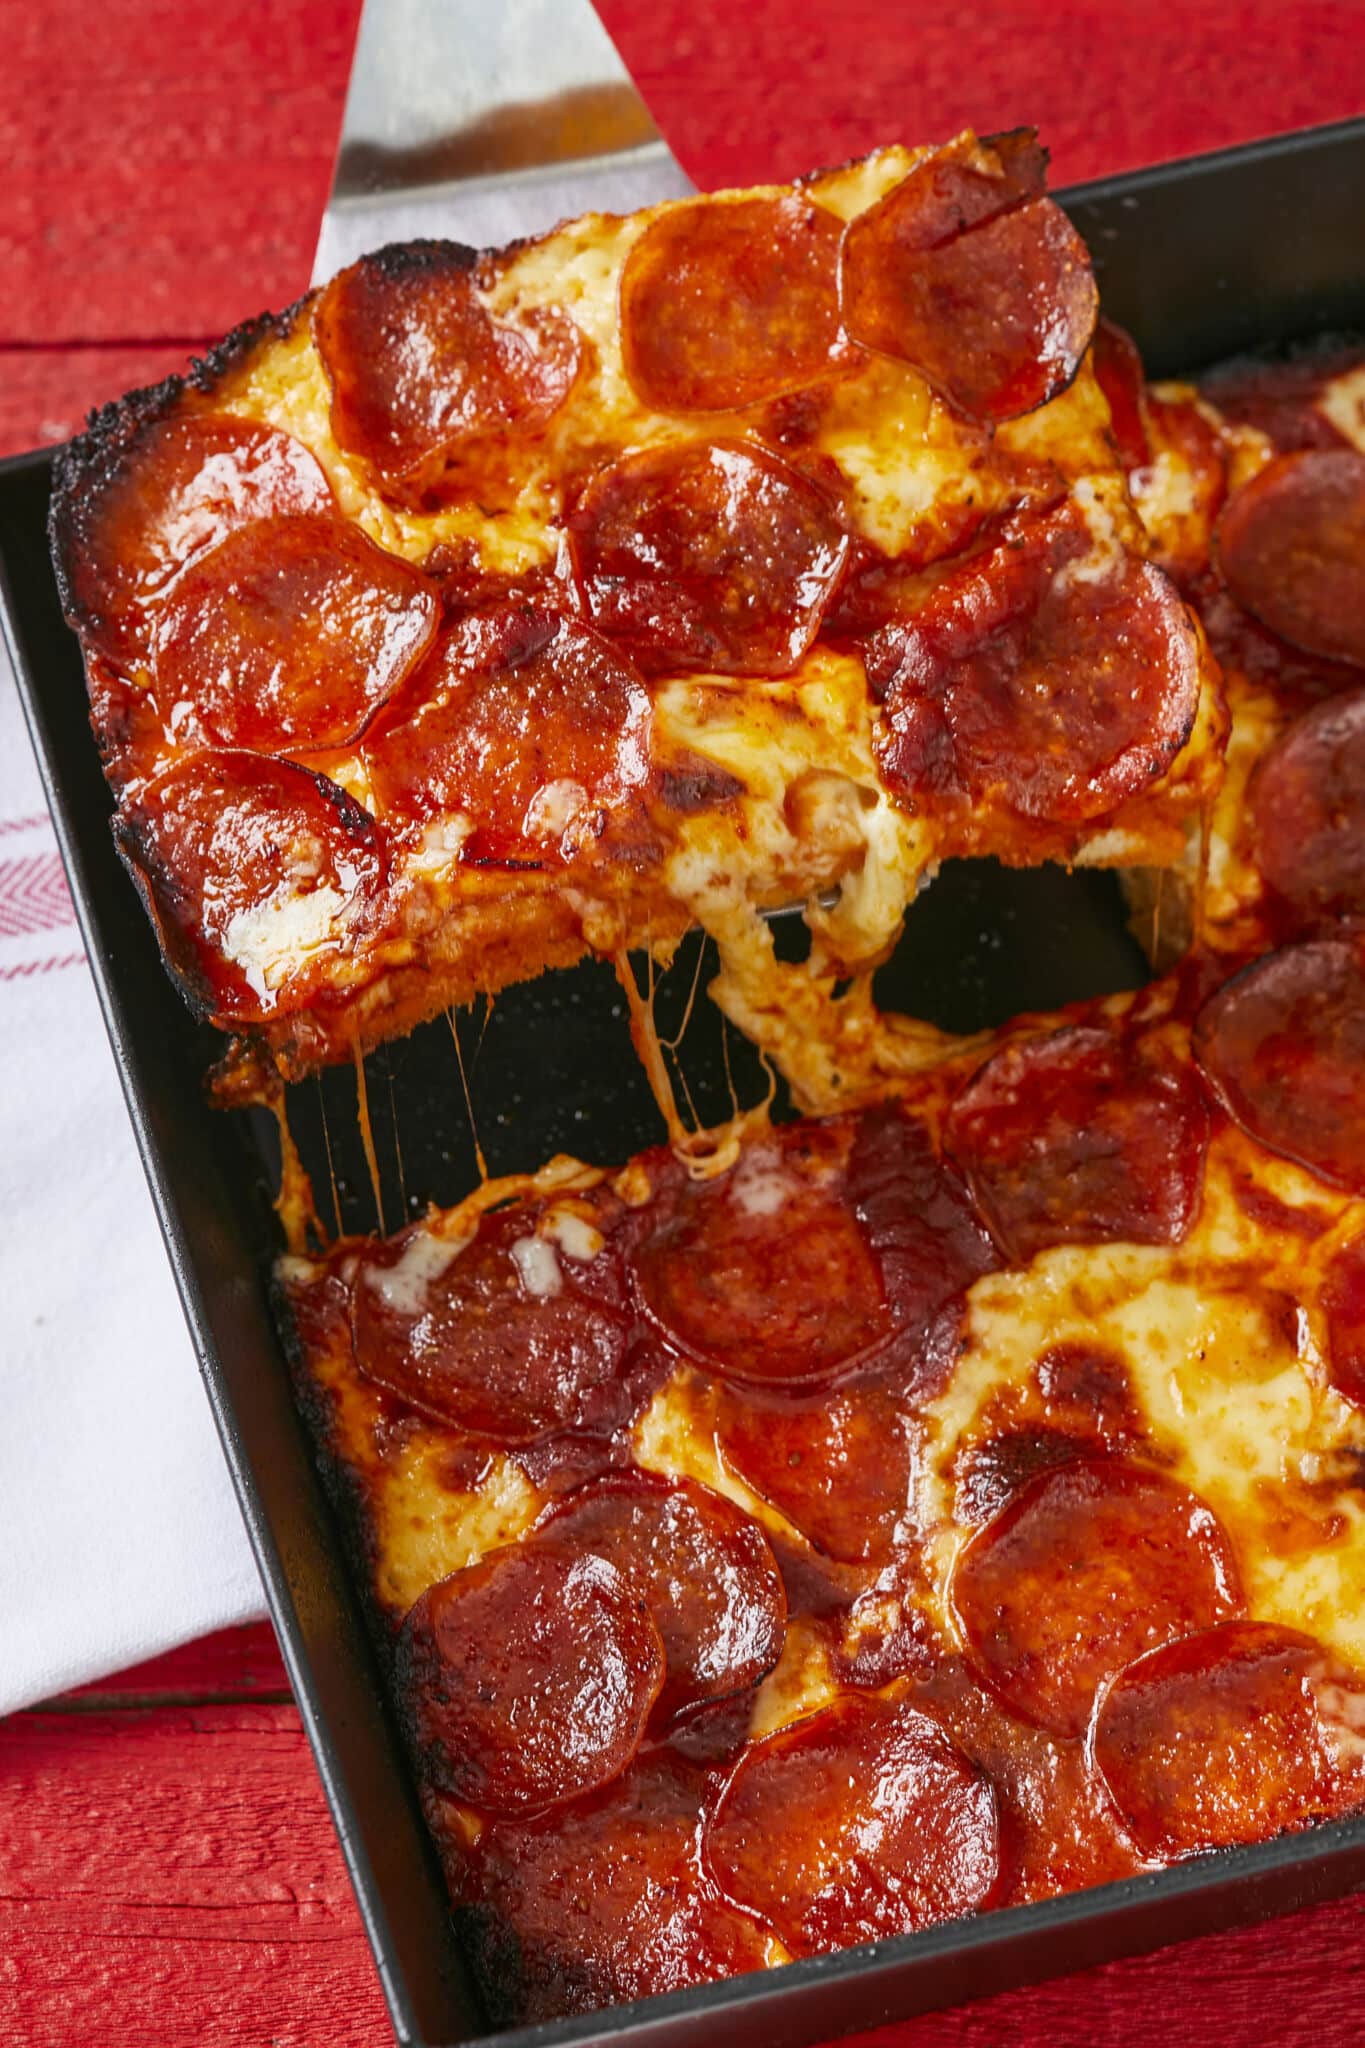 A slice of heavenly delicious pizza is cut and being lifted from the pan, with thick sand airy crust, crunchy caramelized edges, gooey toasted cheese, and thin crispy pepperoni. 